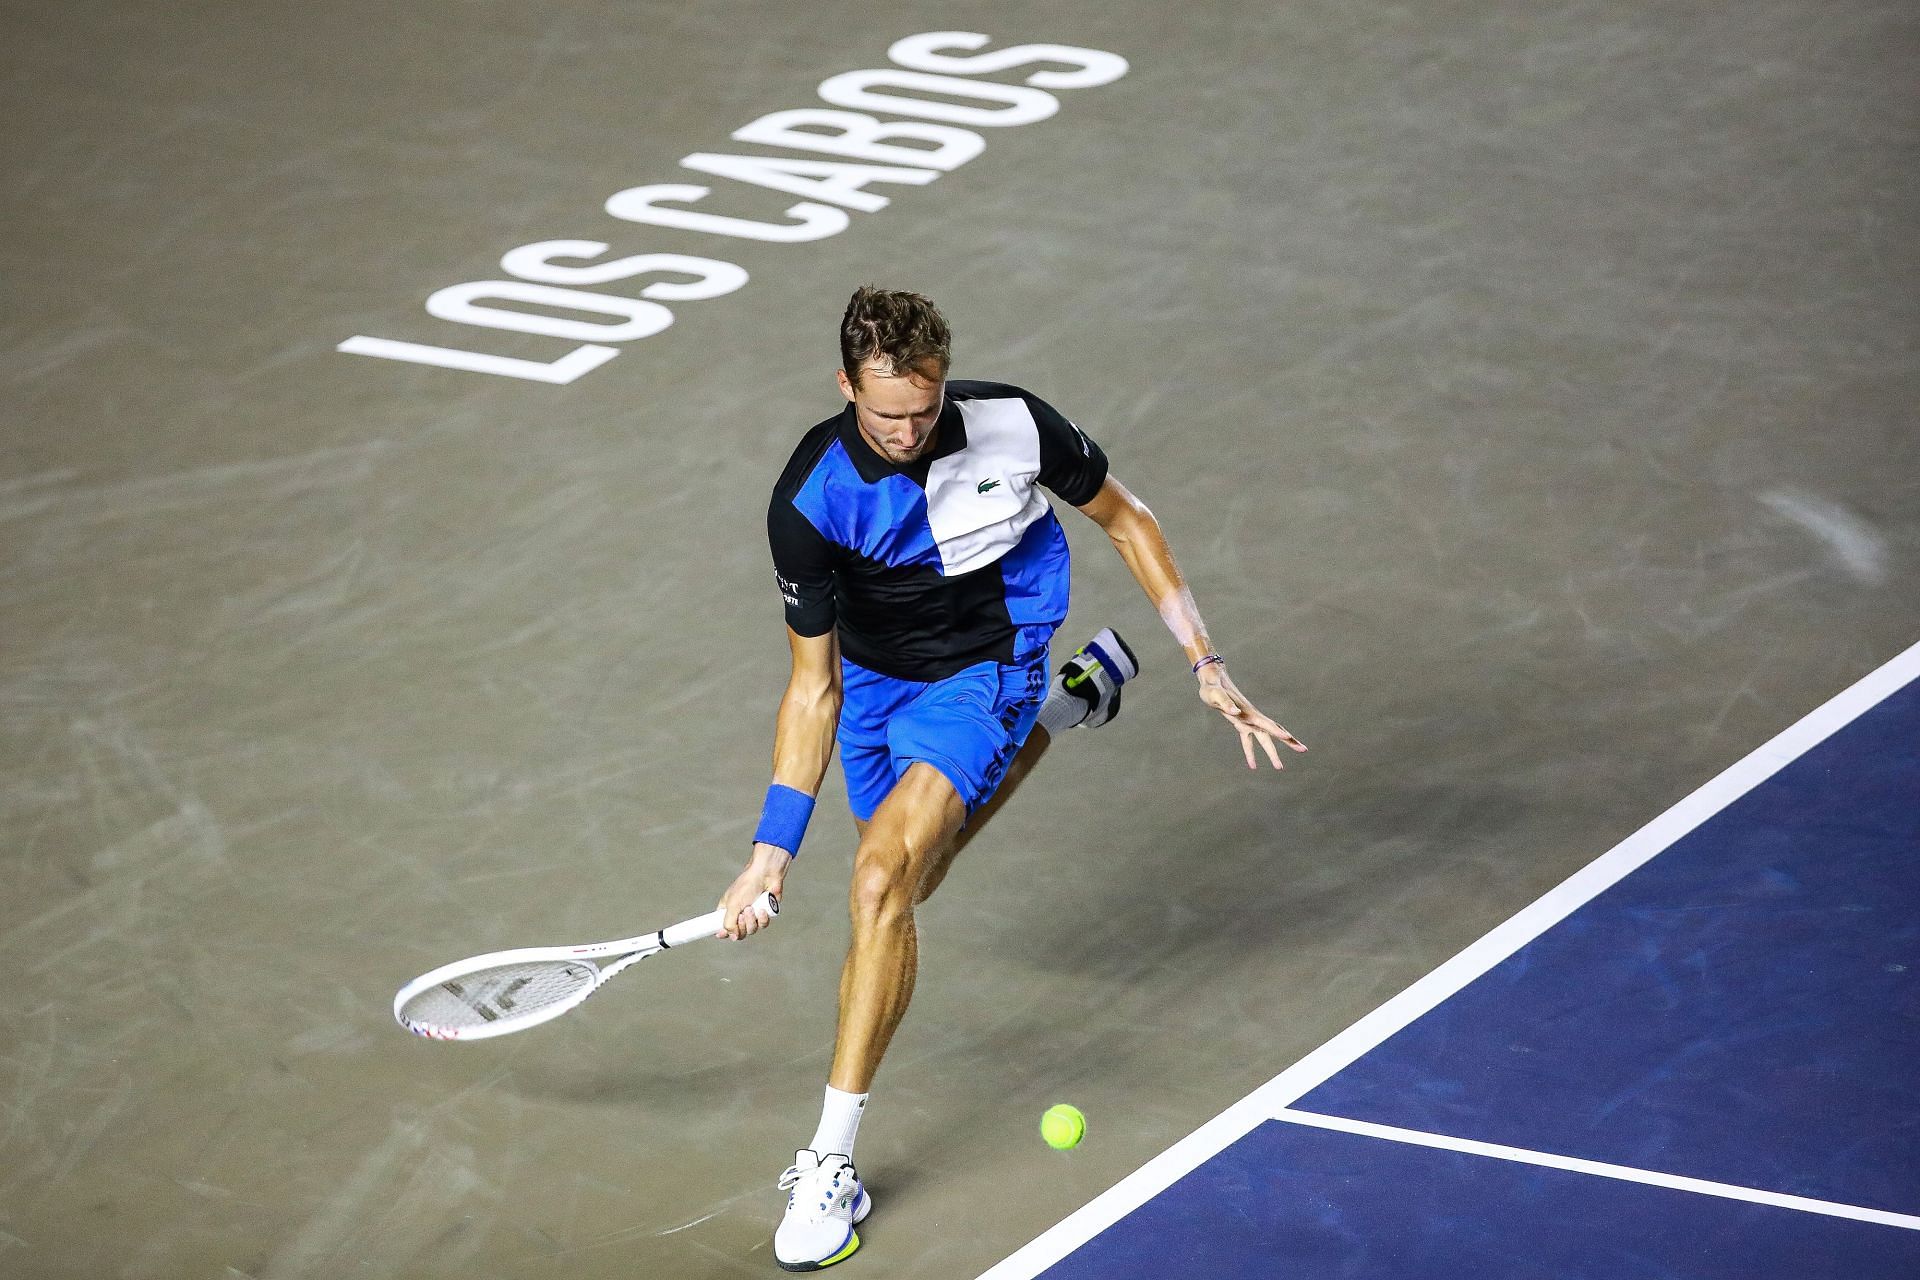 Medvedev in action at the Mifel ATP Los Cabos Open 2022